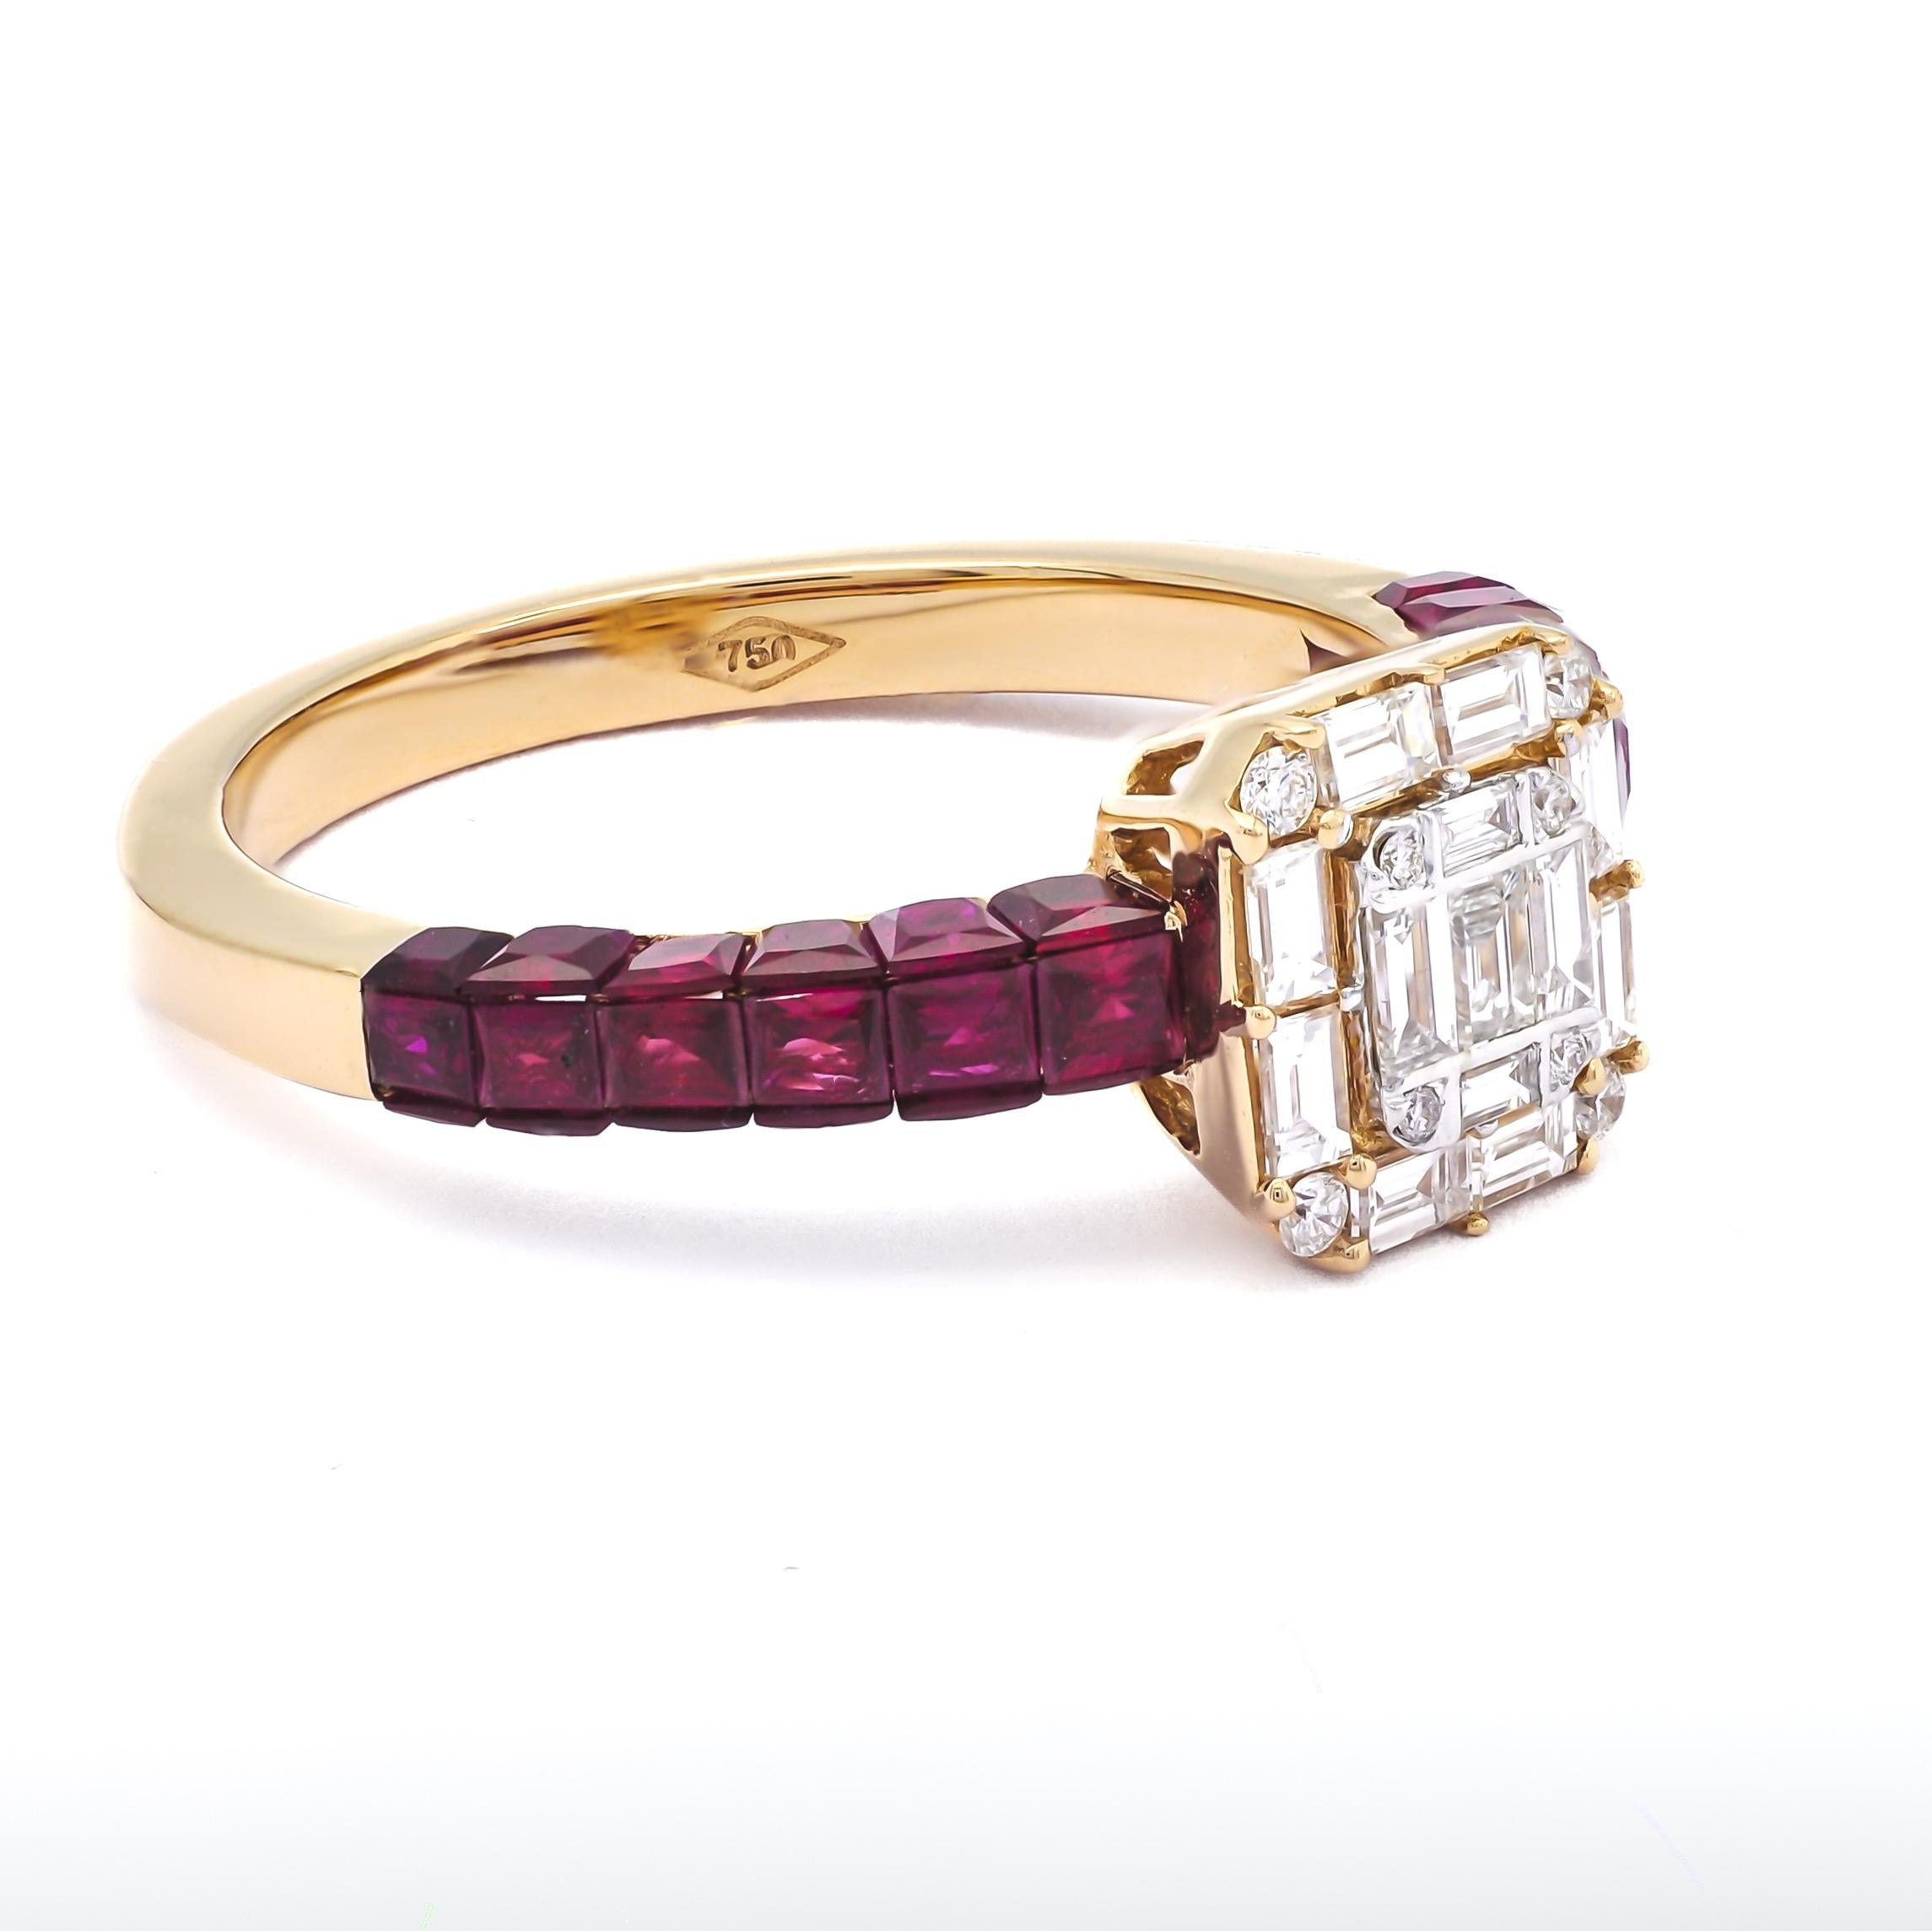 Immerse yourself in the unparalleled elegance of this exquisite 18 KT Rose Gold statement ring, where the allure of radiant Rubies meets the timeless beauty of diamonds. At its heart lies a mesmerizing baguette cluster, delicately nestled within the